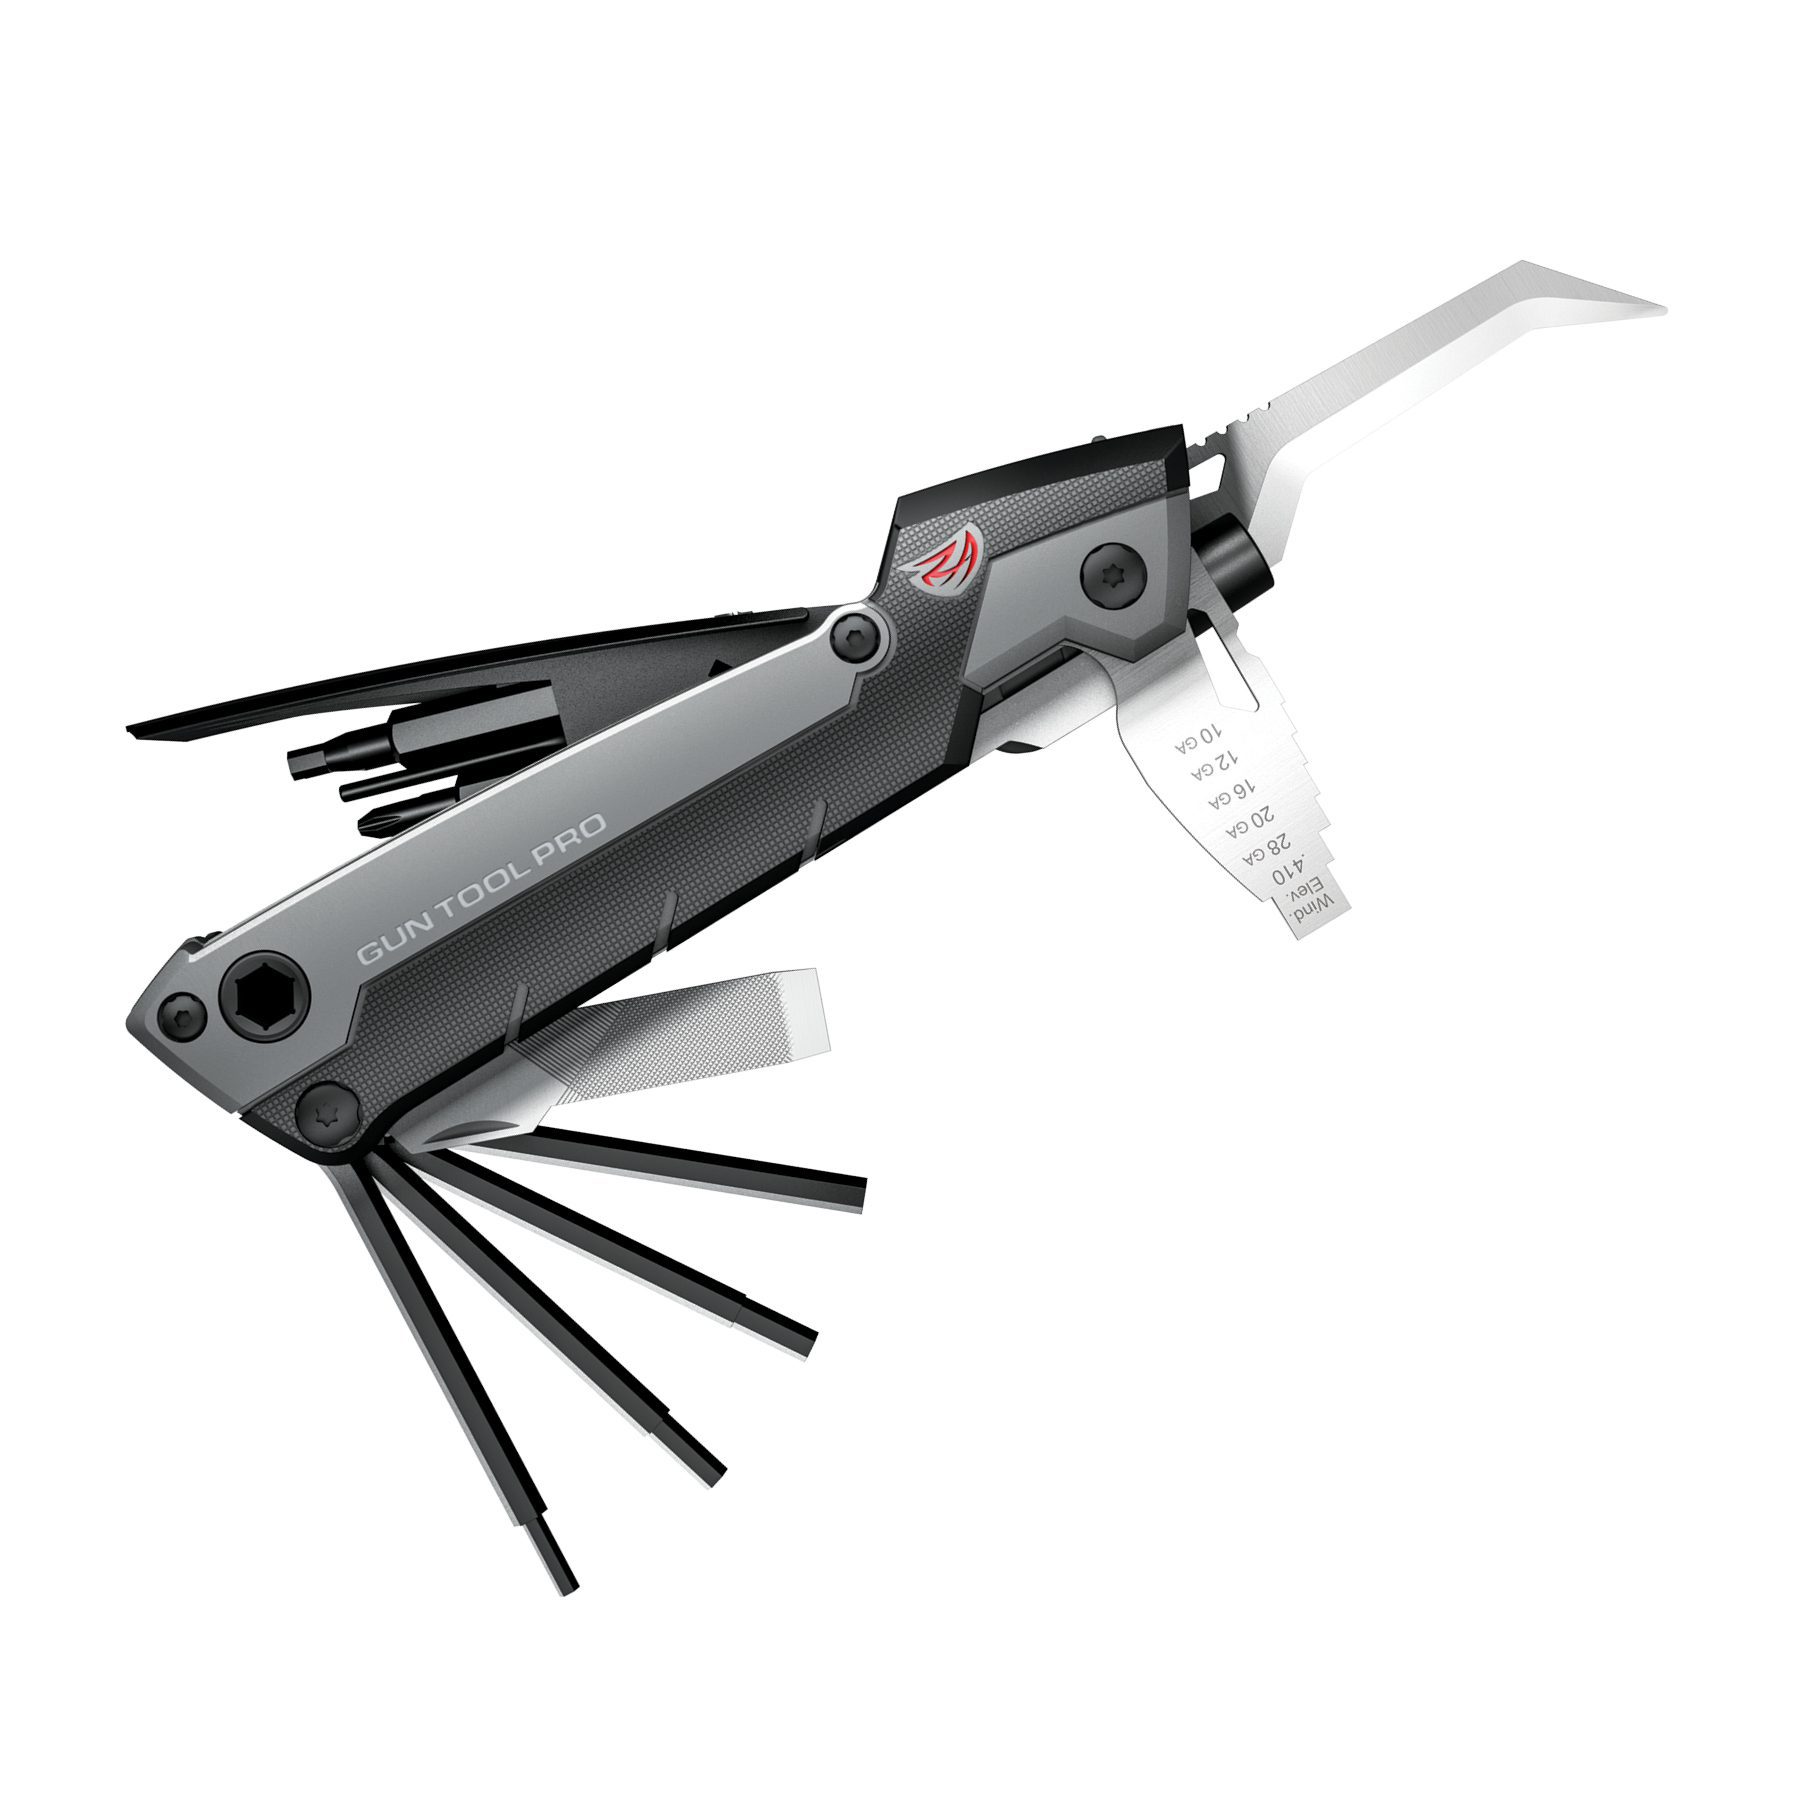 a swiss army knife with multiple blades and a tag